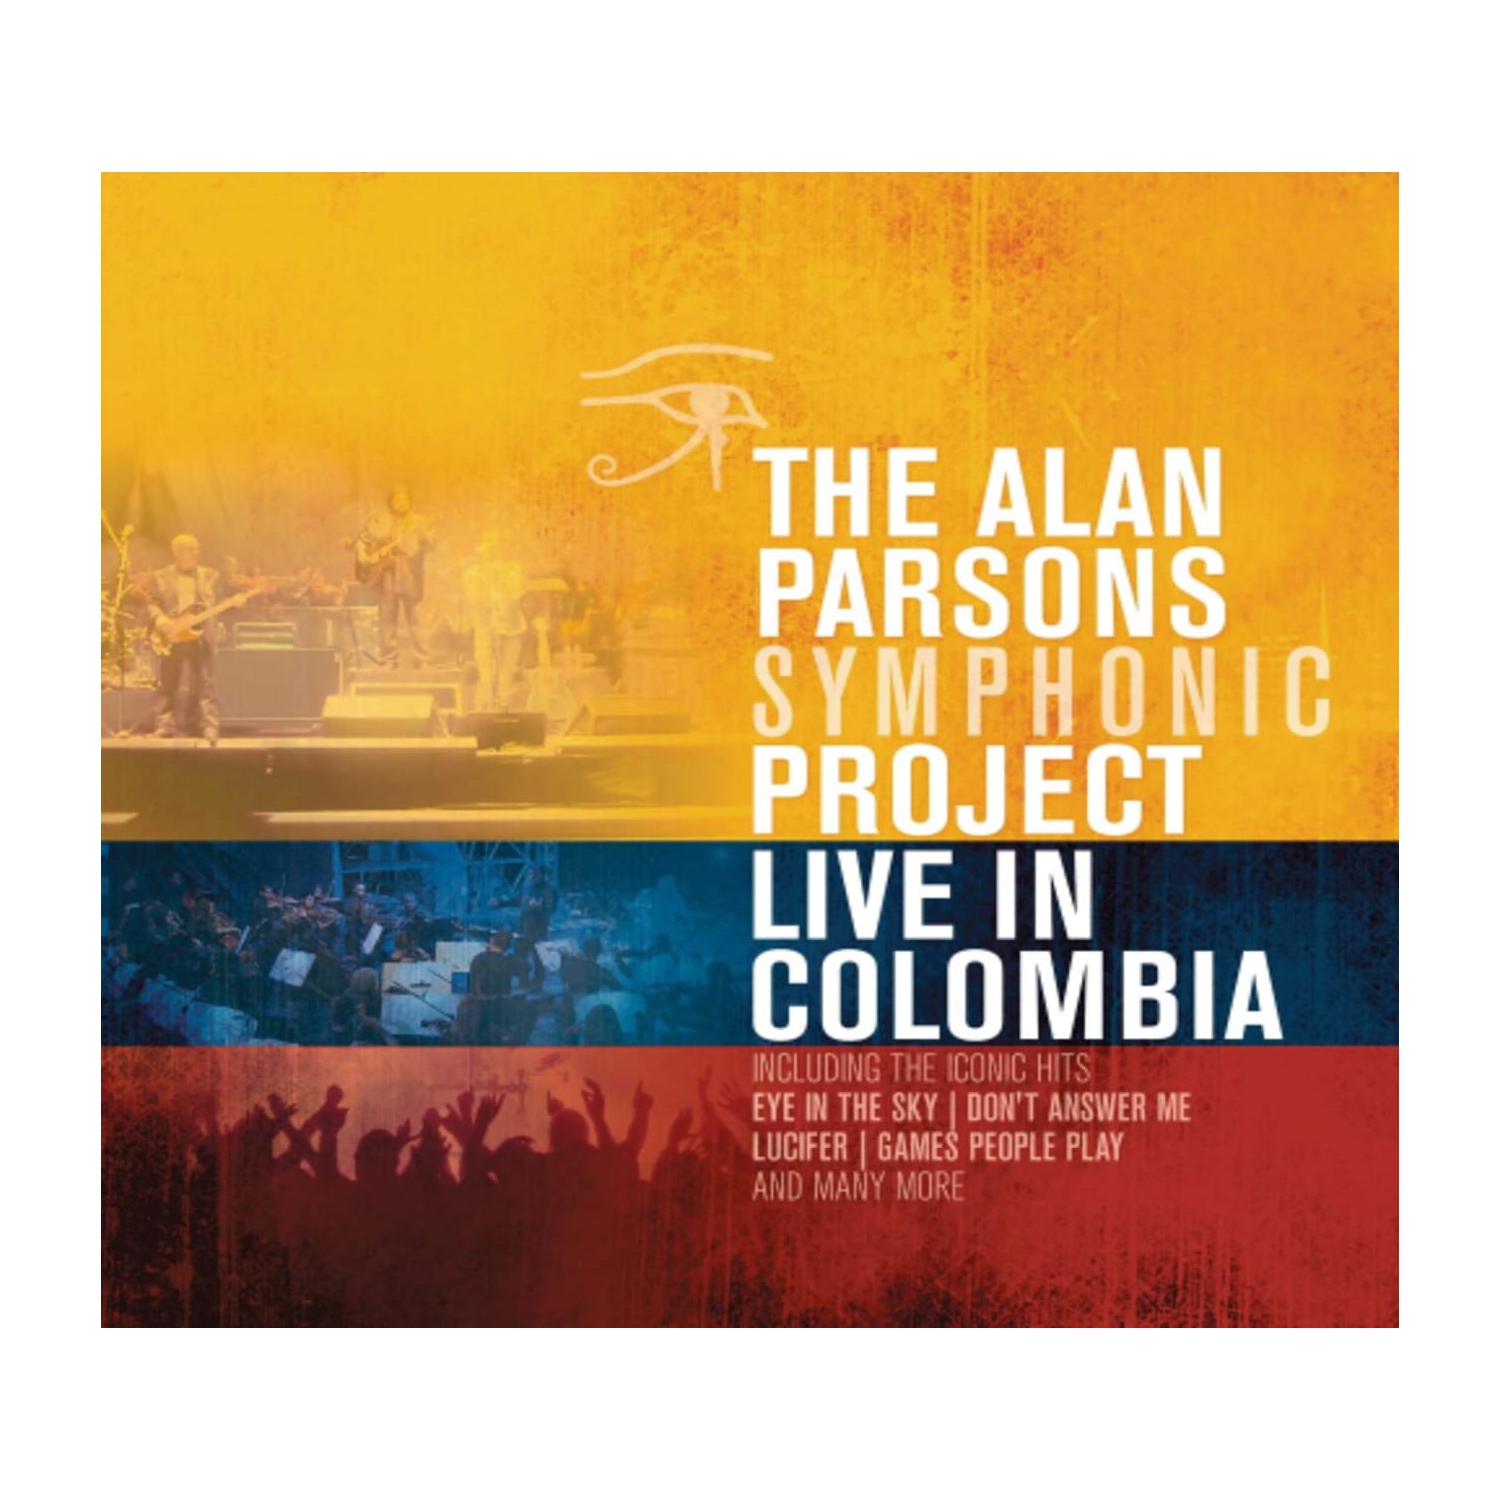 LIVE IN COLOMBIA - THE ALAN PARSONS SYMPHONIC PROJECT [CD]